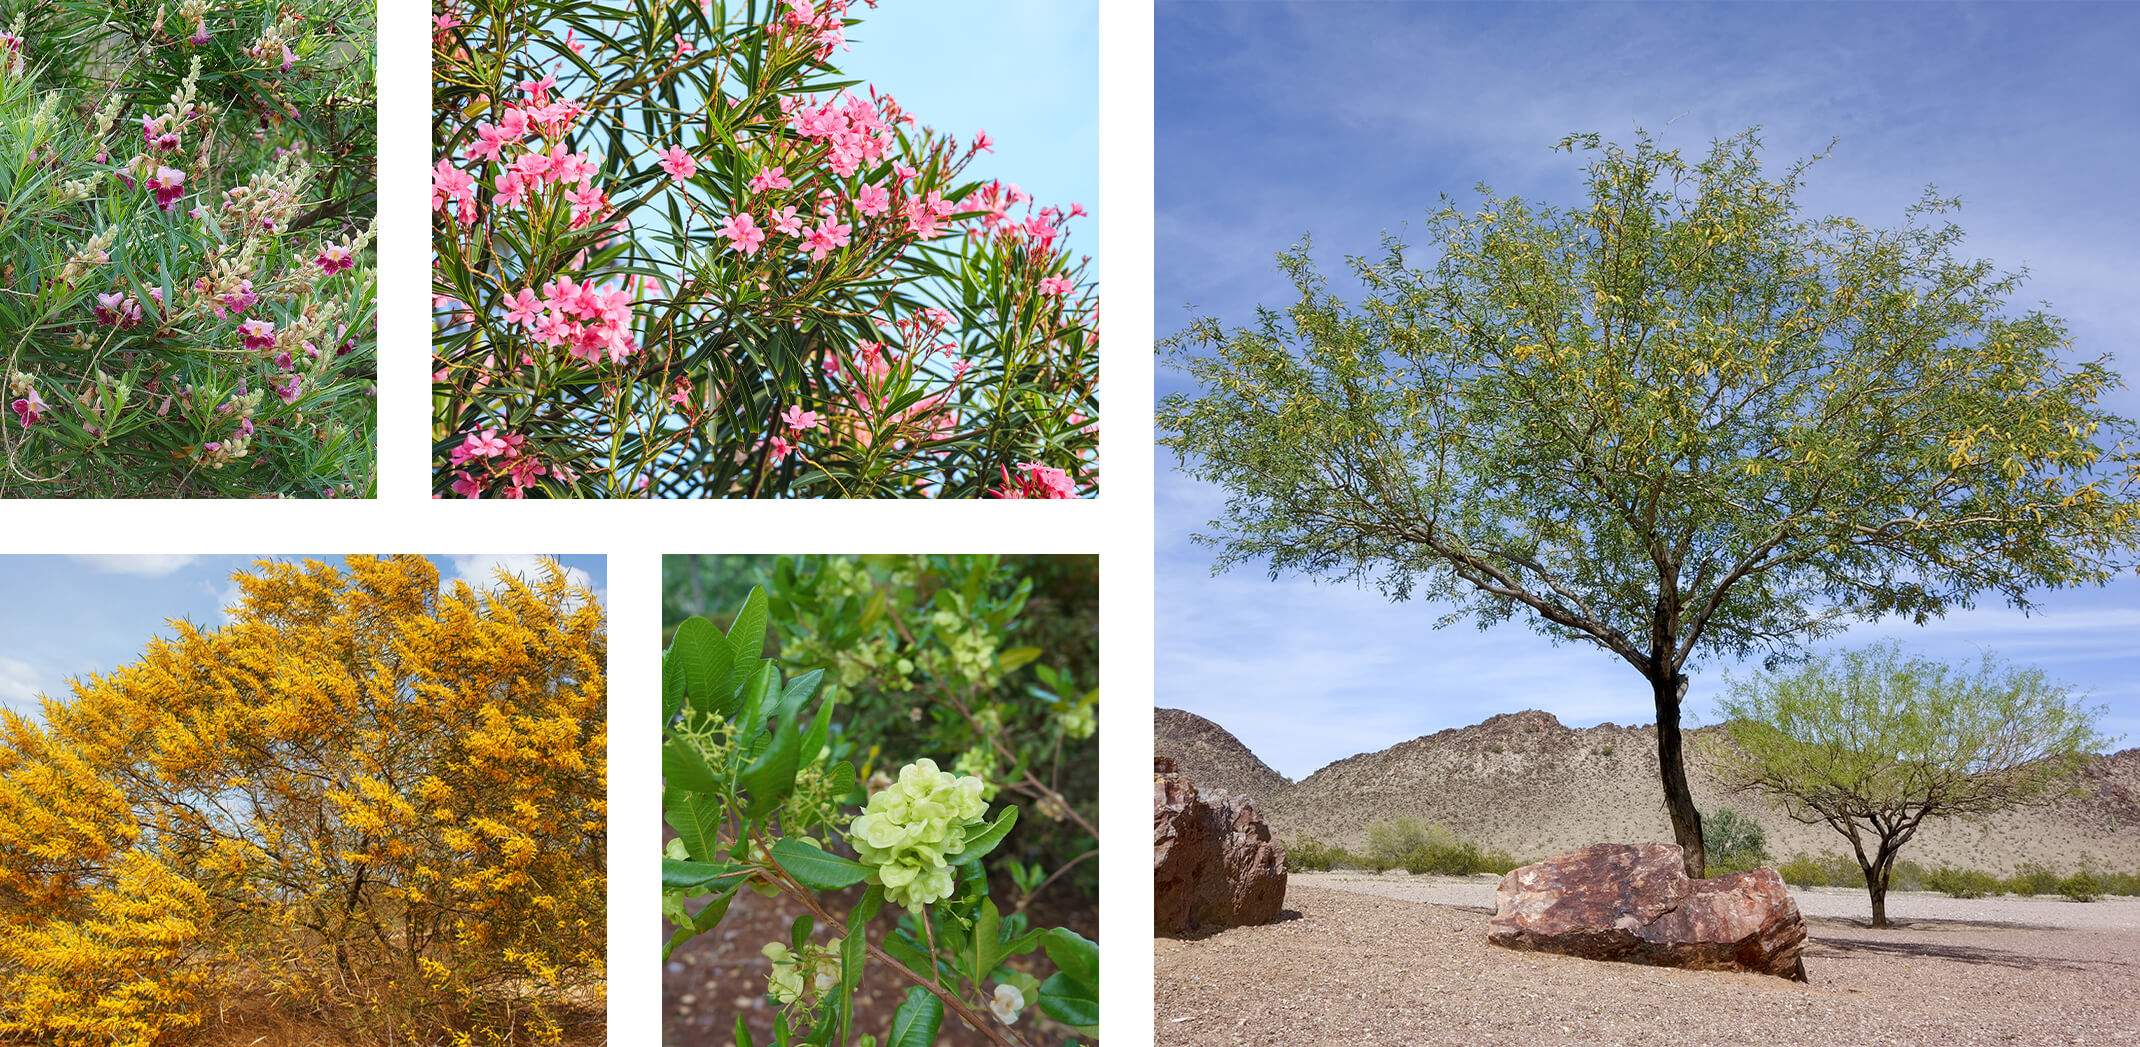 5 Low-Water Use Tree Varieties: Desert Willow, Acassia aneura, Nerium, Green Hopseed, and Mesquite.